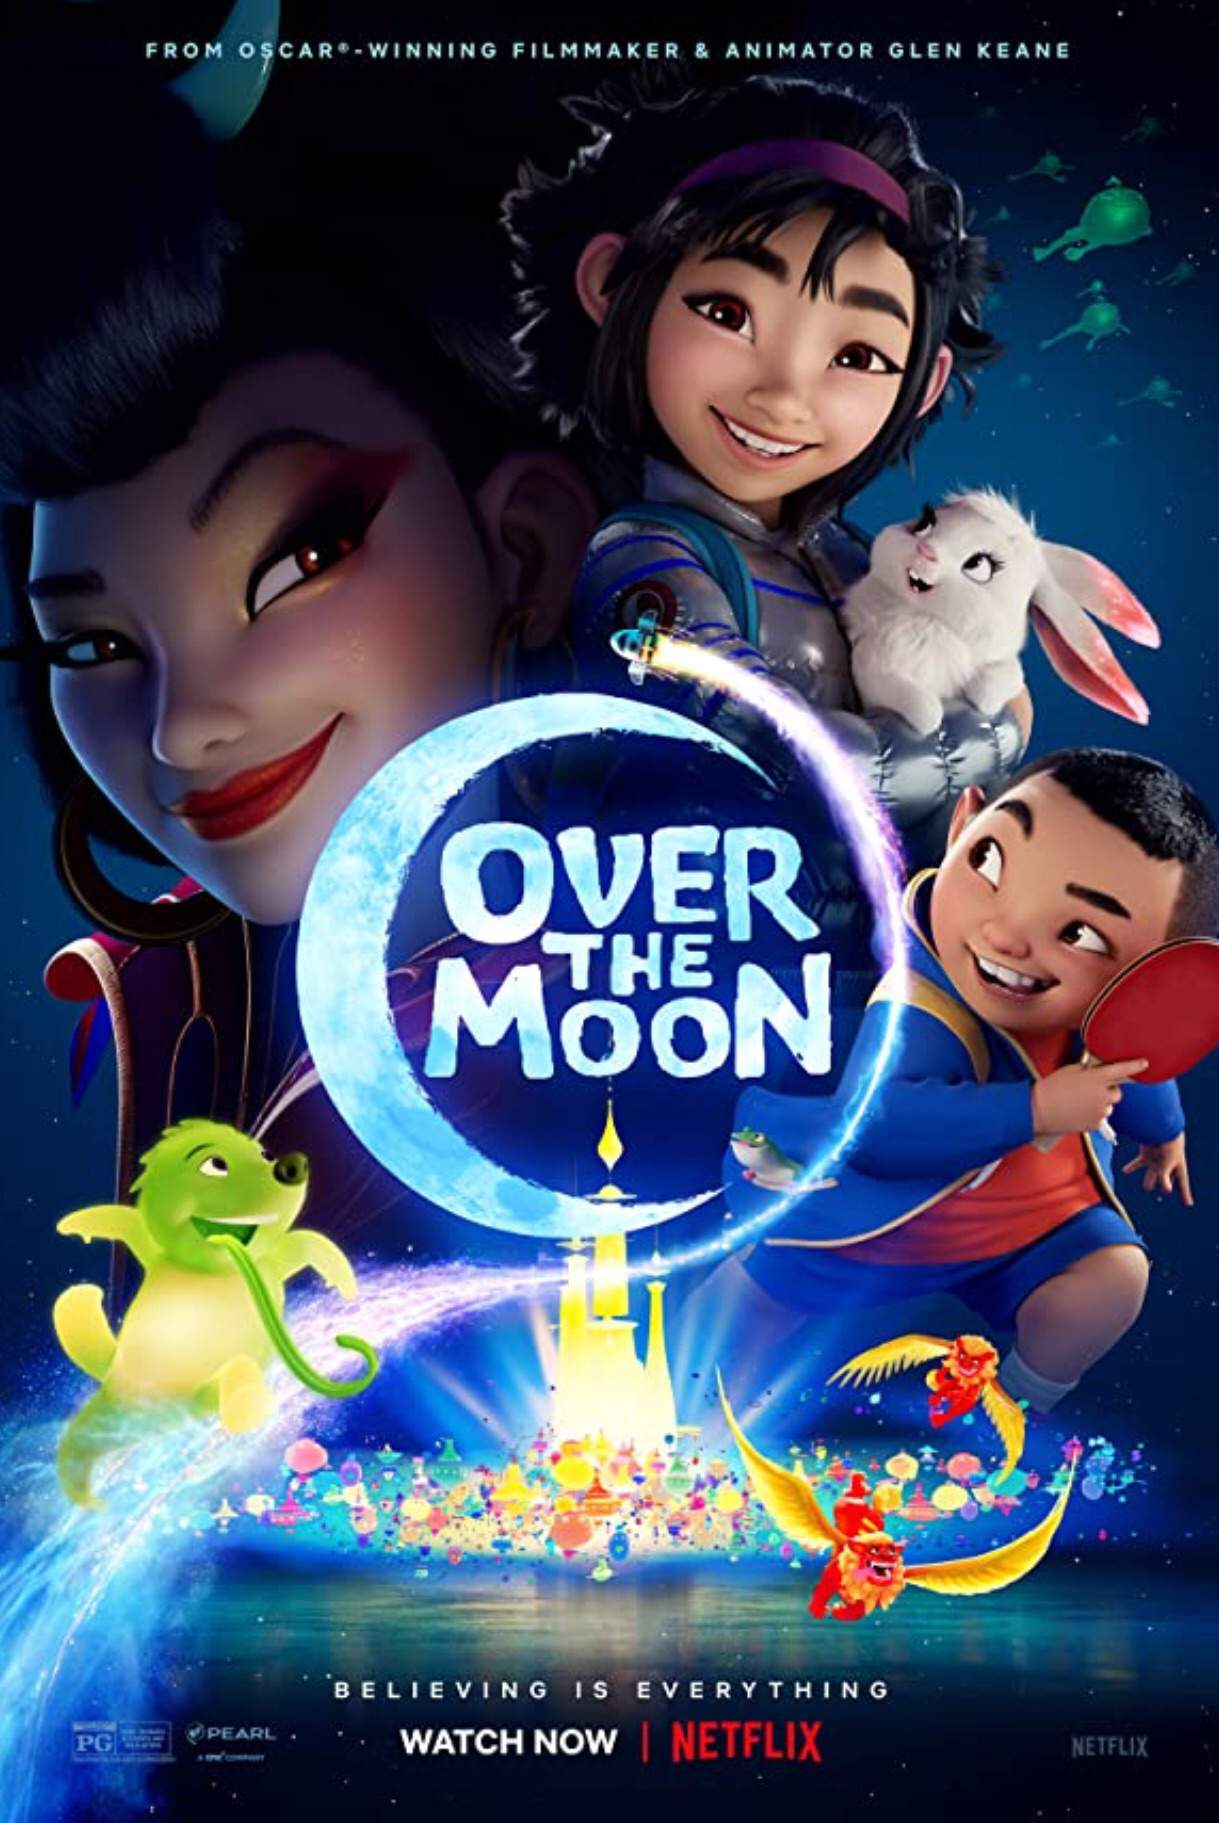 Over the Moon review: A powerful tale of love and loss | Cartoon Amino